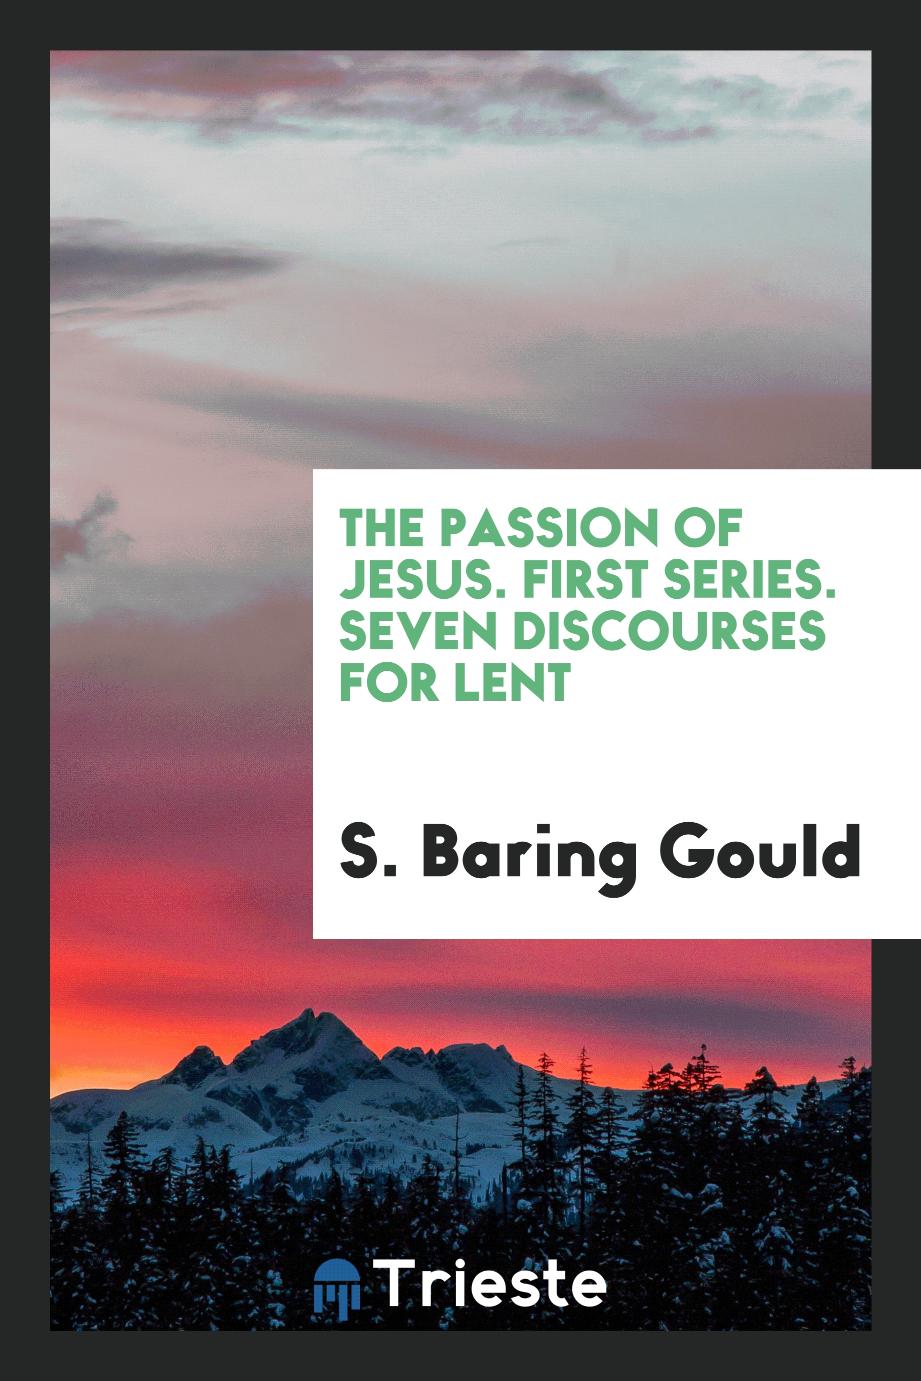 The Passion of Jesus. First Series. Seven Discourses for Lent